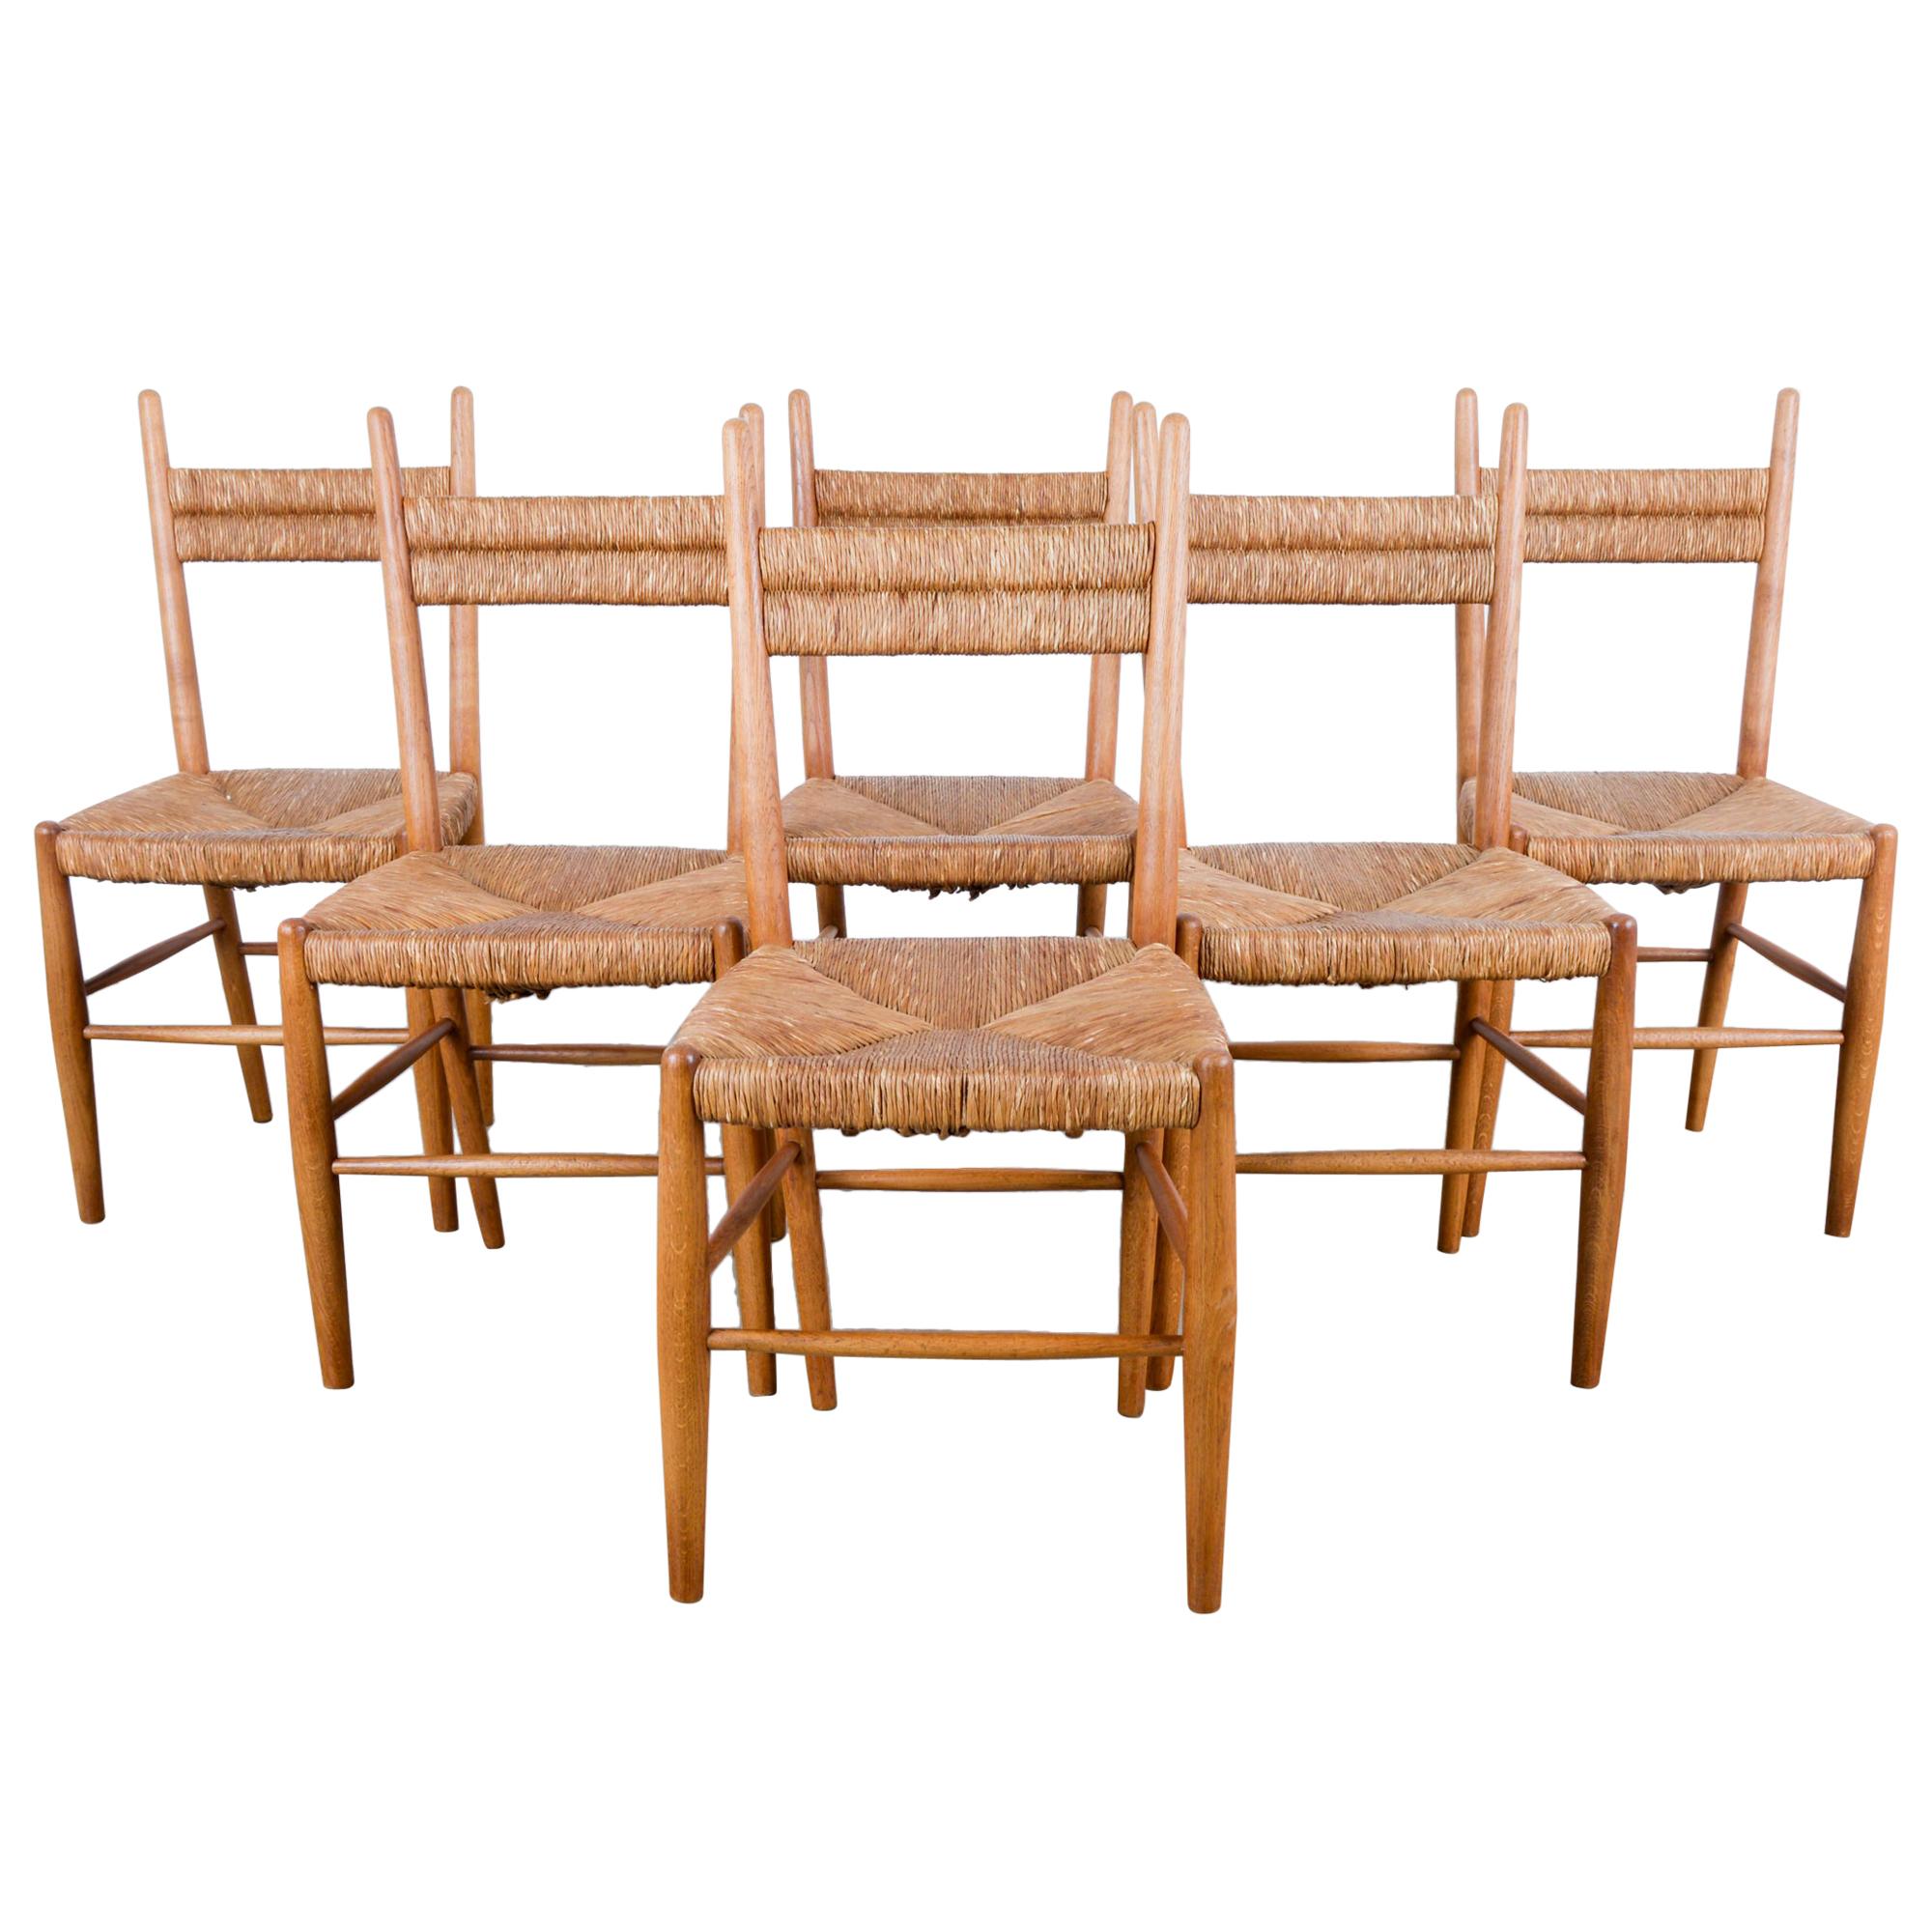 1960s French Oak Chairs with Woven Seats and Backs, Set of Six